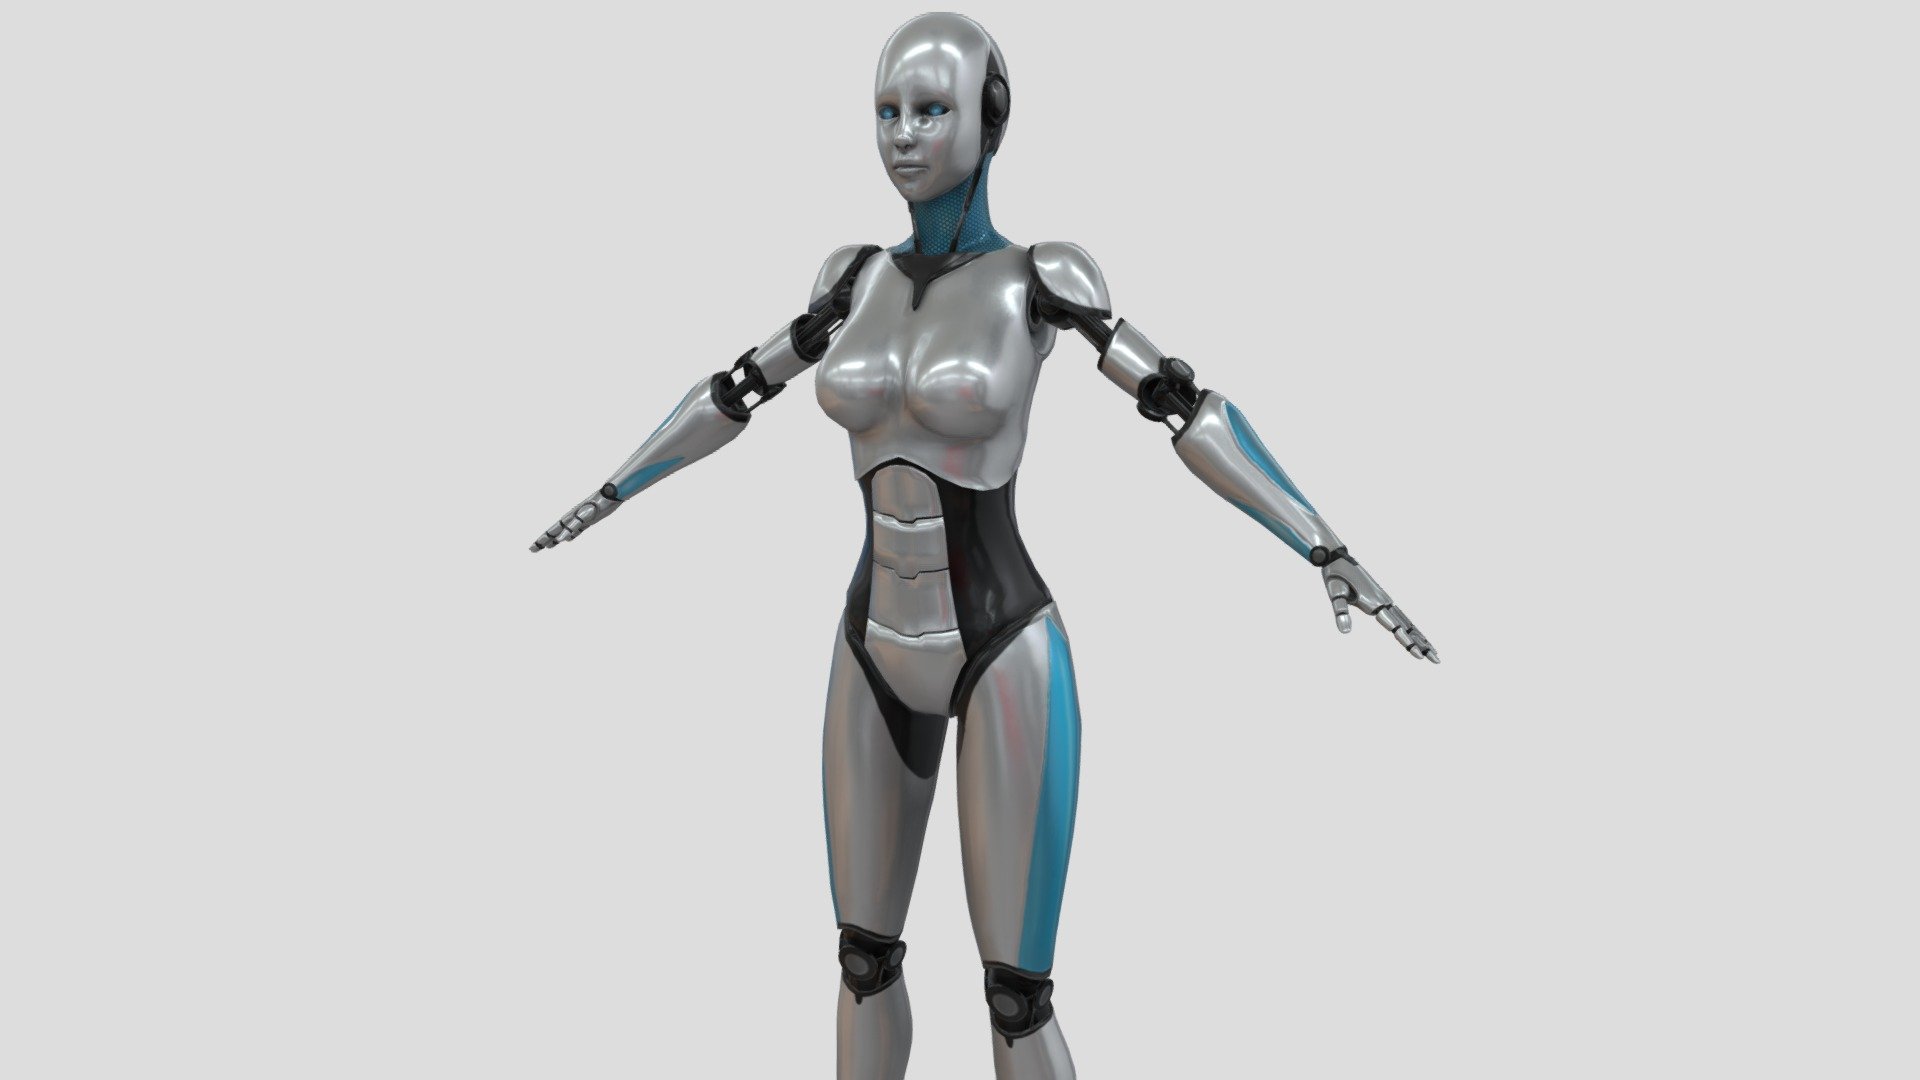 Can fit to any character, ready for games

A-Pose Character

Quads, Clean Topology

No overlapping logical unwrapped UVs

Baked Diffuse Texture Map

Normal and Specular Maps

FBX, OBJ

PBR Or Classic - Android Robot Character - Buy Royalty Free 3D model by FizzyDesign 3d model